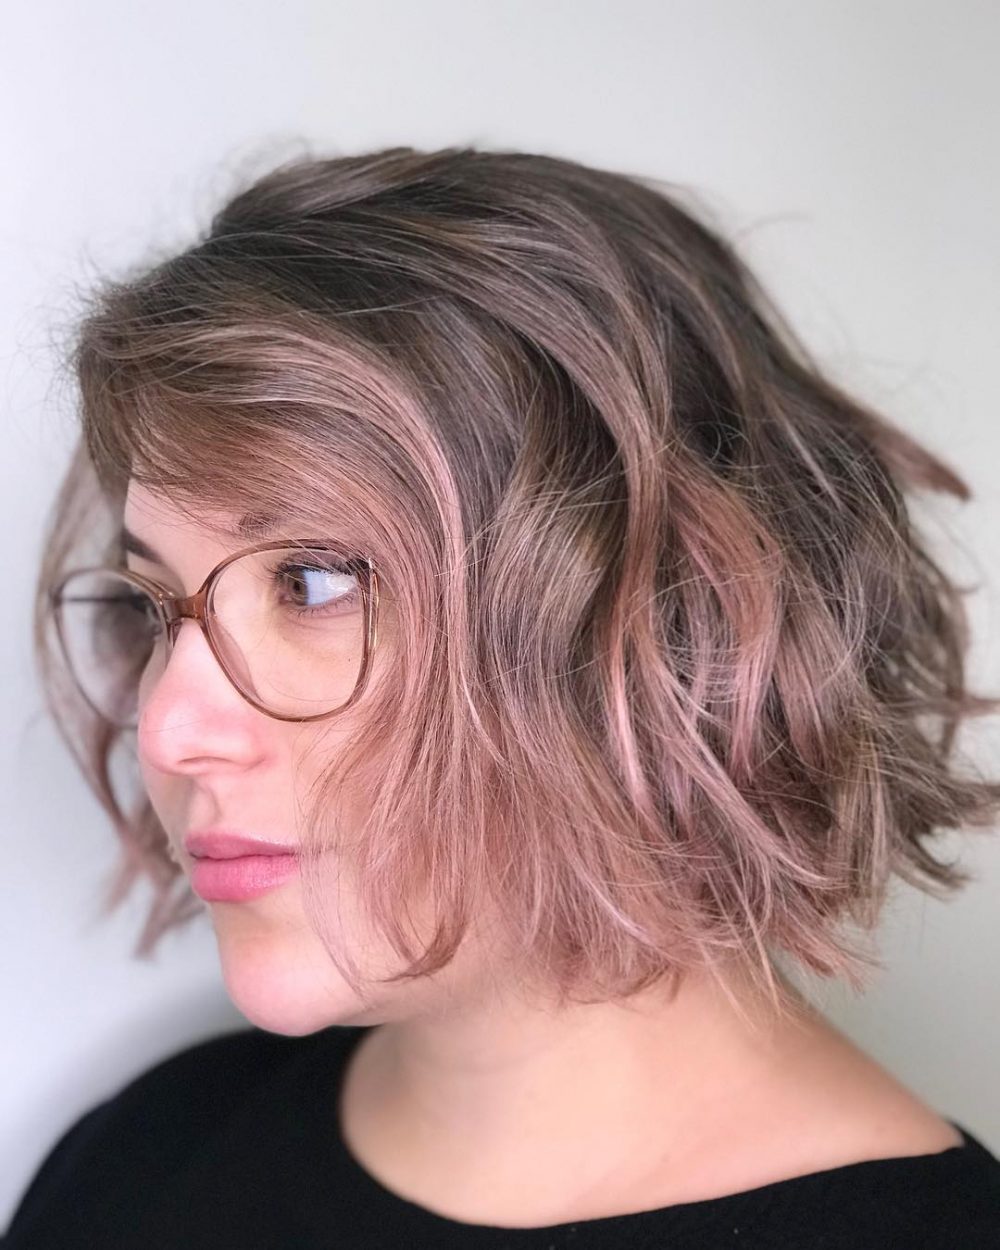 Dusty Rose Gold Highlighted Hair